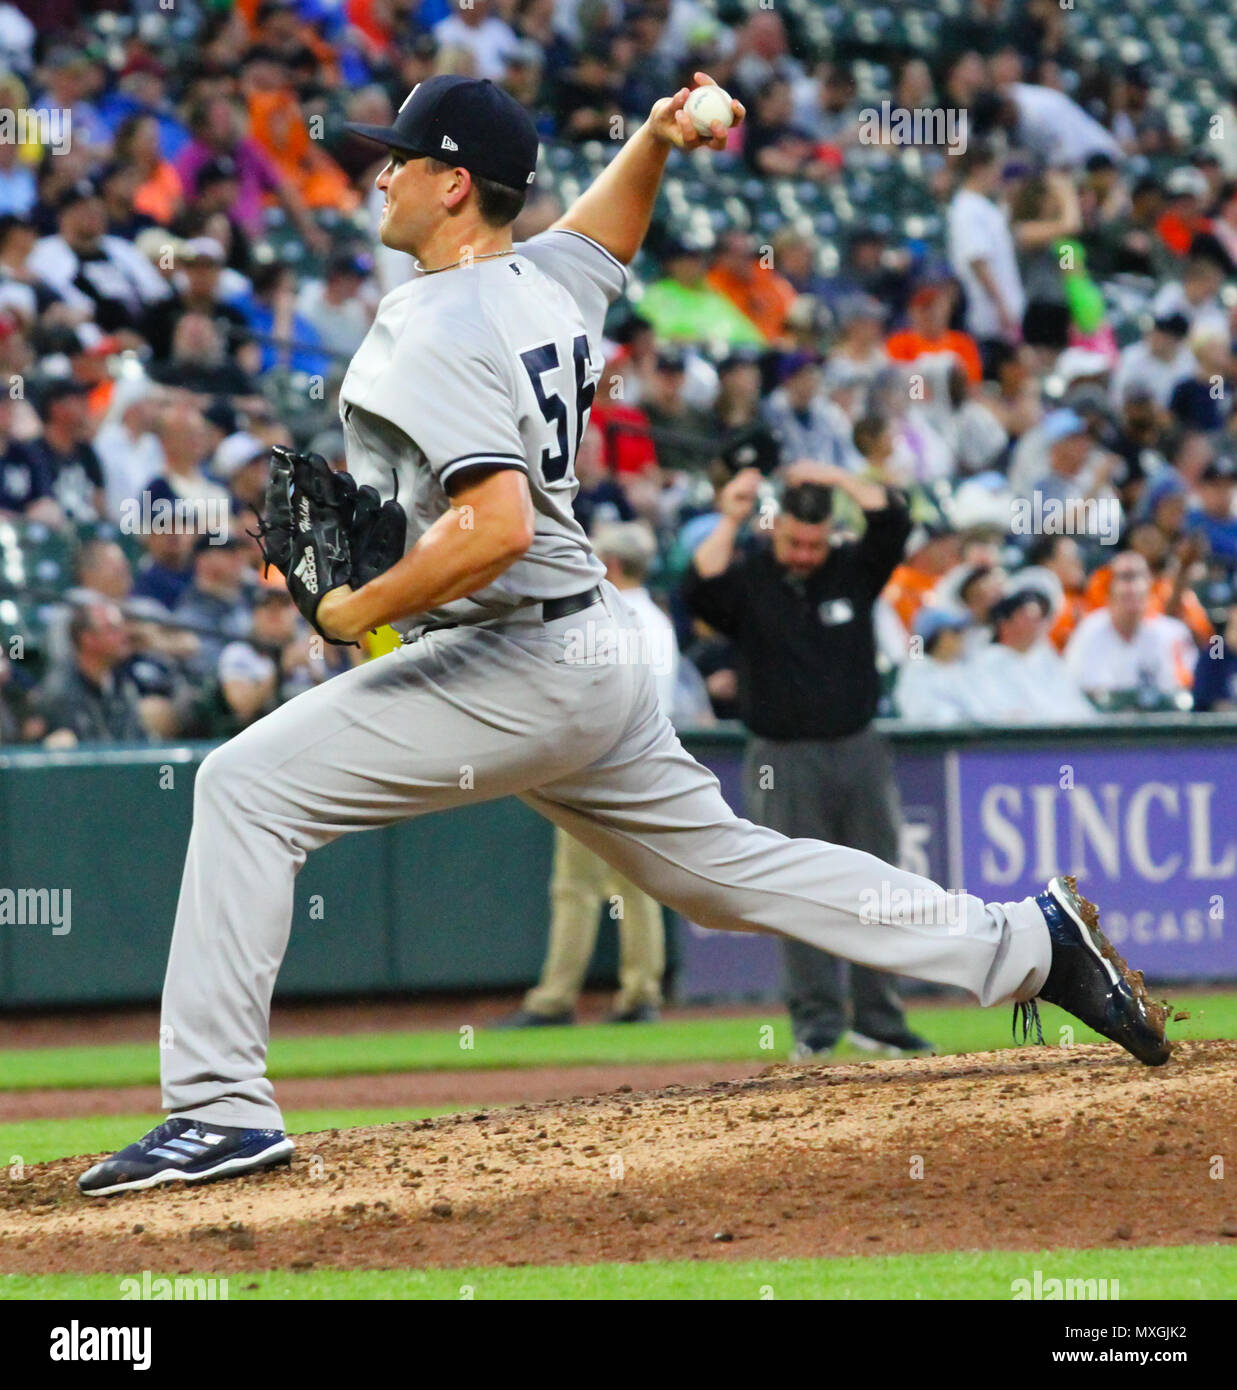 June 2, 2018 - New York Yankees relief pitcher Jonathan Holder (56) during the New York Yankees vs Baltimore Orioles game at Oriole Park at Camden Yards in Baltimore, Md. New York beat Baltimore 8-5. Jen Hadsell/CSM Stock Photo